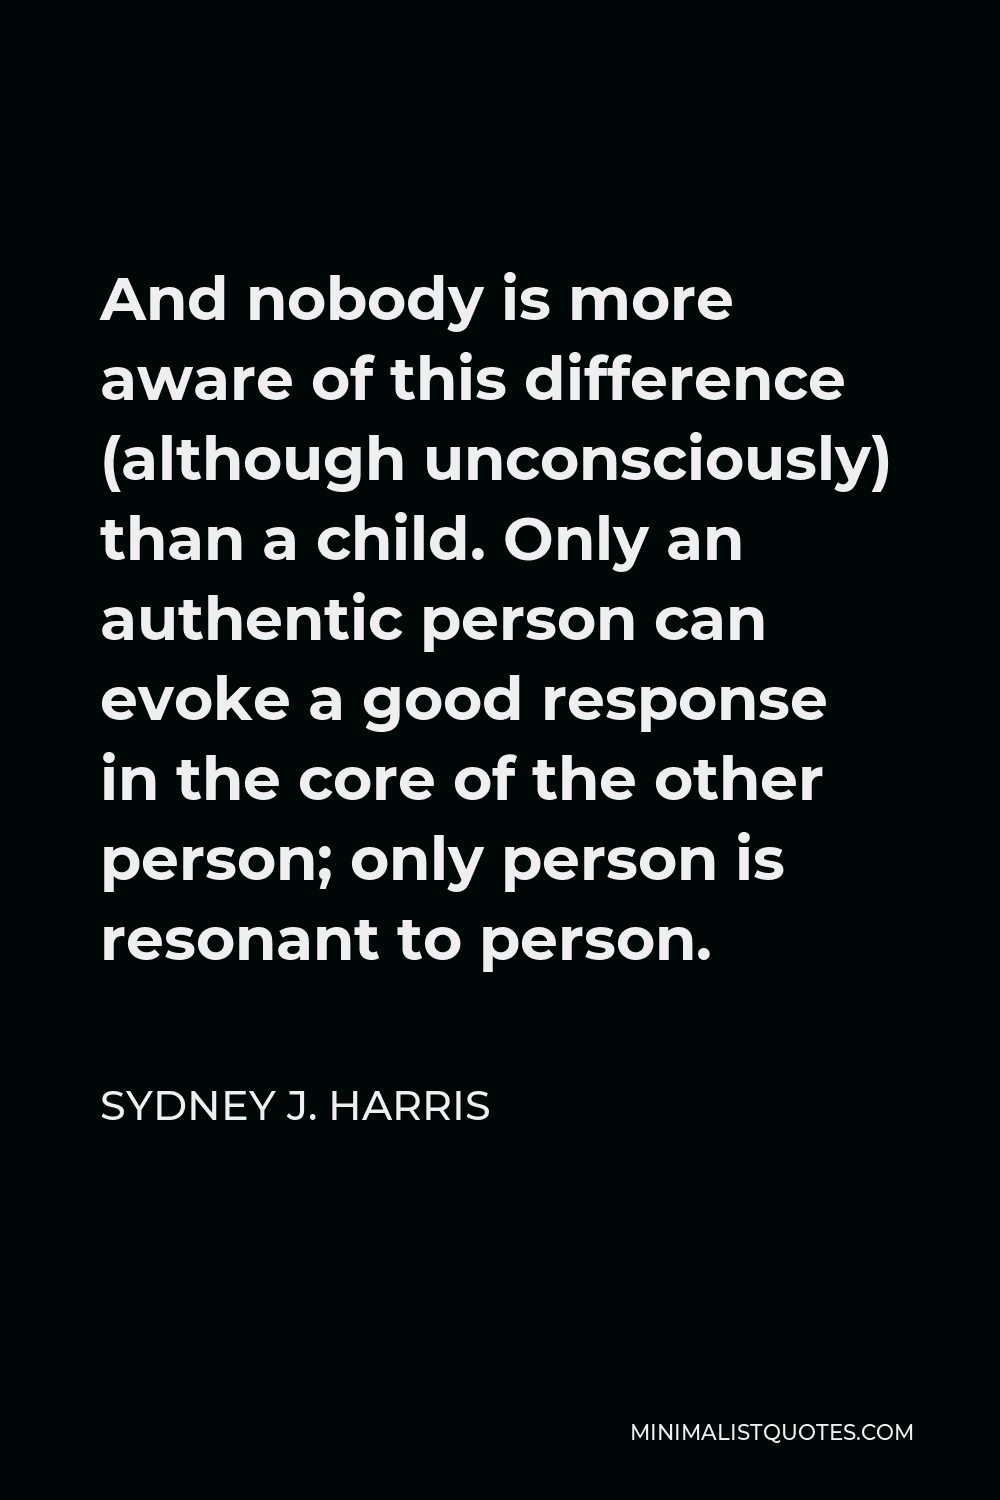 Sydney J. Harris Quote - And nobody is more aware of this difference (although unconsciously) than a child. Only an authentic person can evoke a good response in the core of the other person; only person is resonant to person.